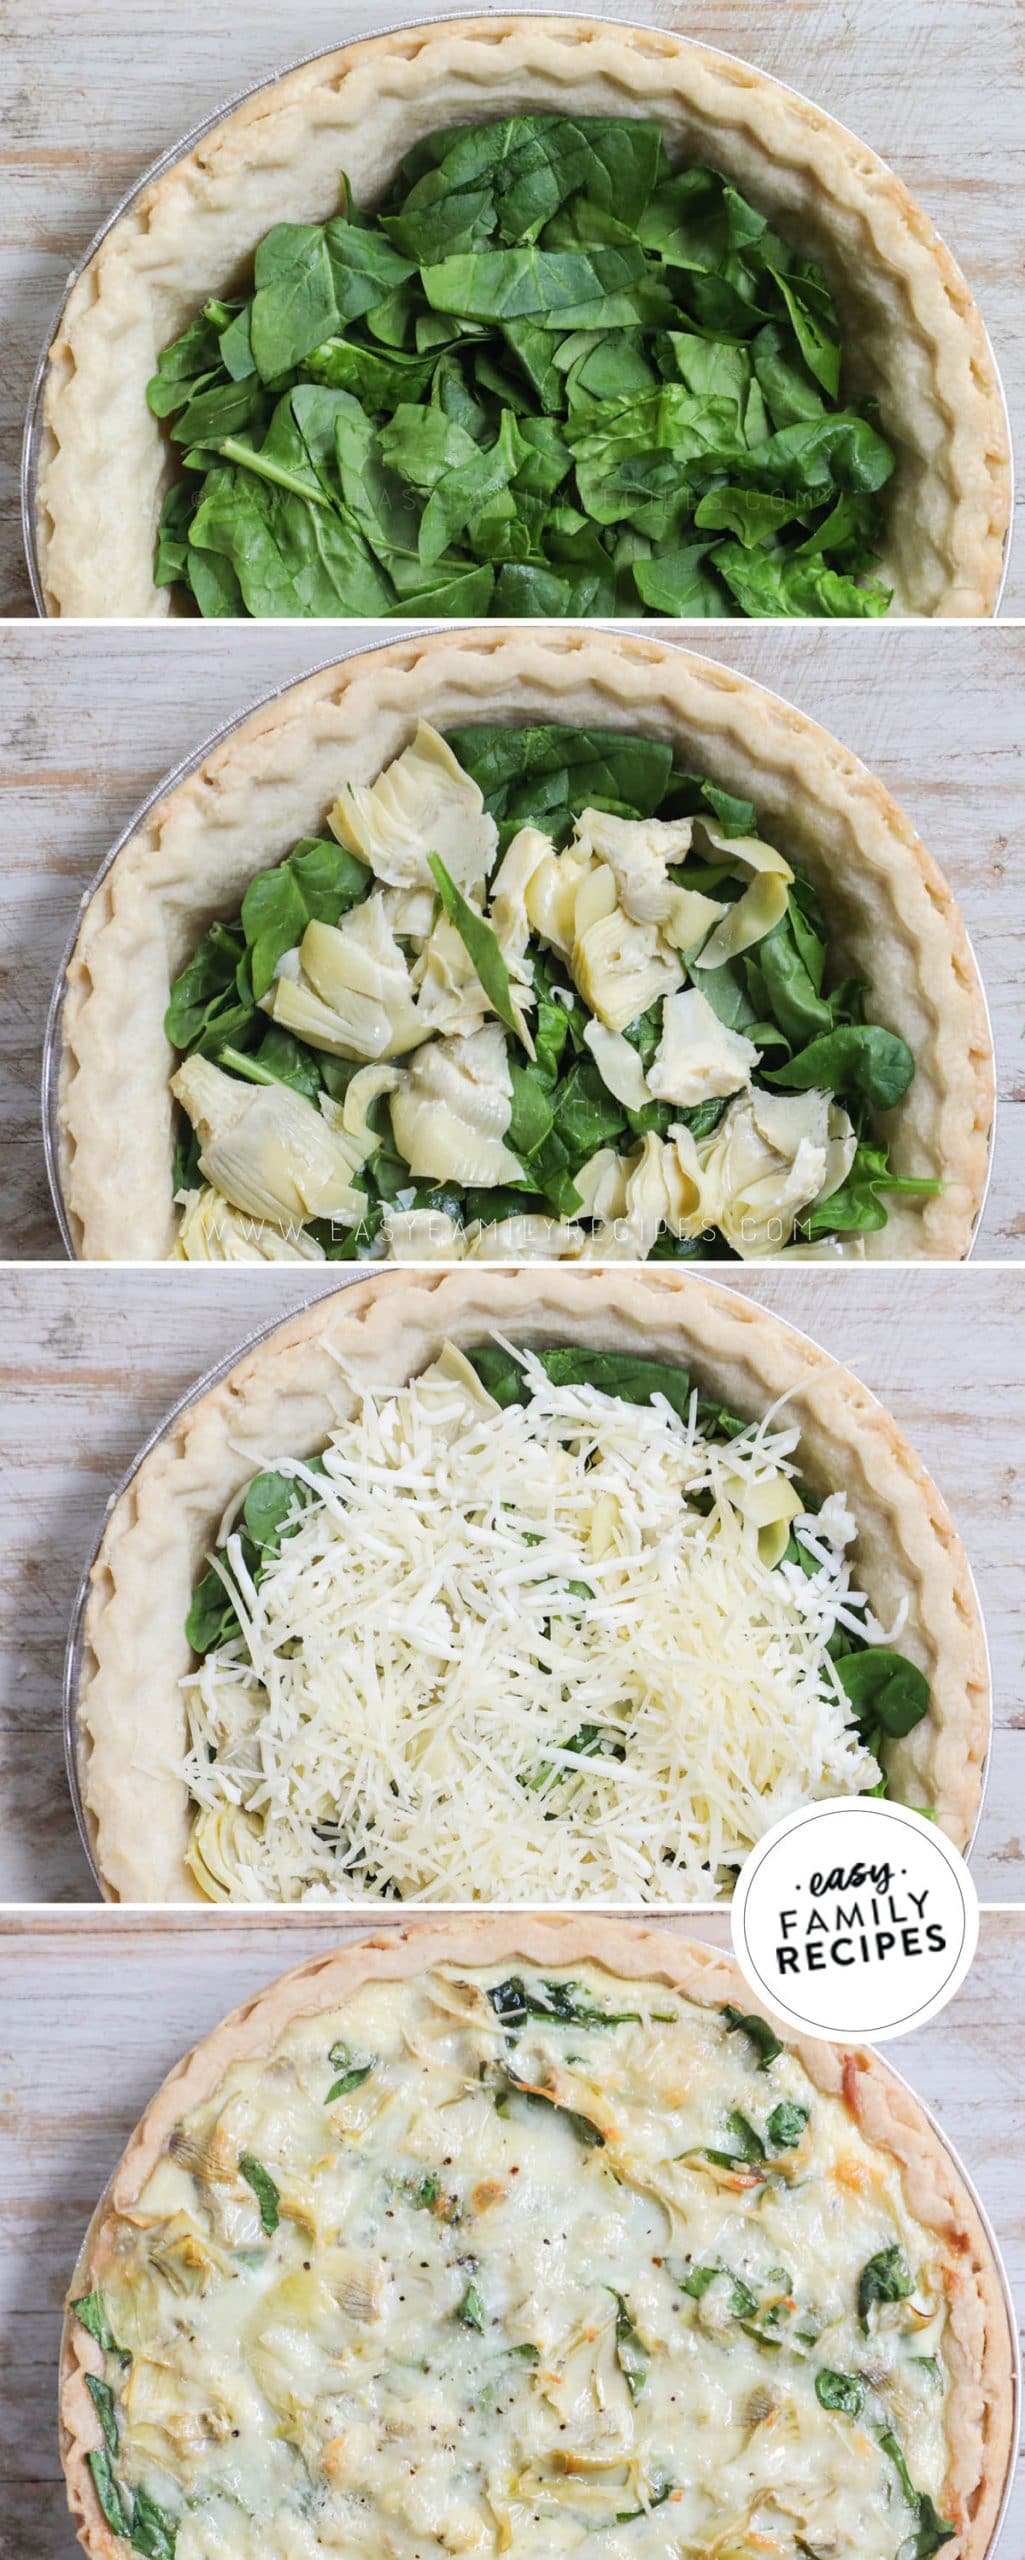 Process photos for How to Make Spinach Artichoke Quiche 1. Par-bake pie crust and add fresh spinach. 2. add artichokes and cheese. 3. Pour egg mixture over top. 4. Bake until the middle is just set.